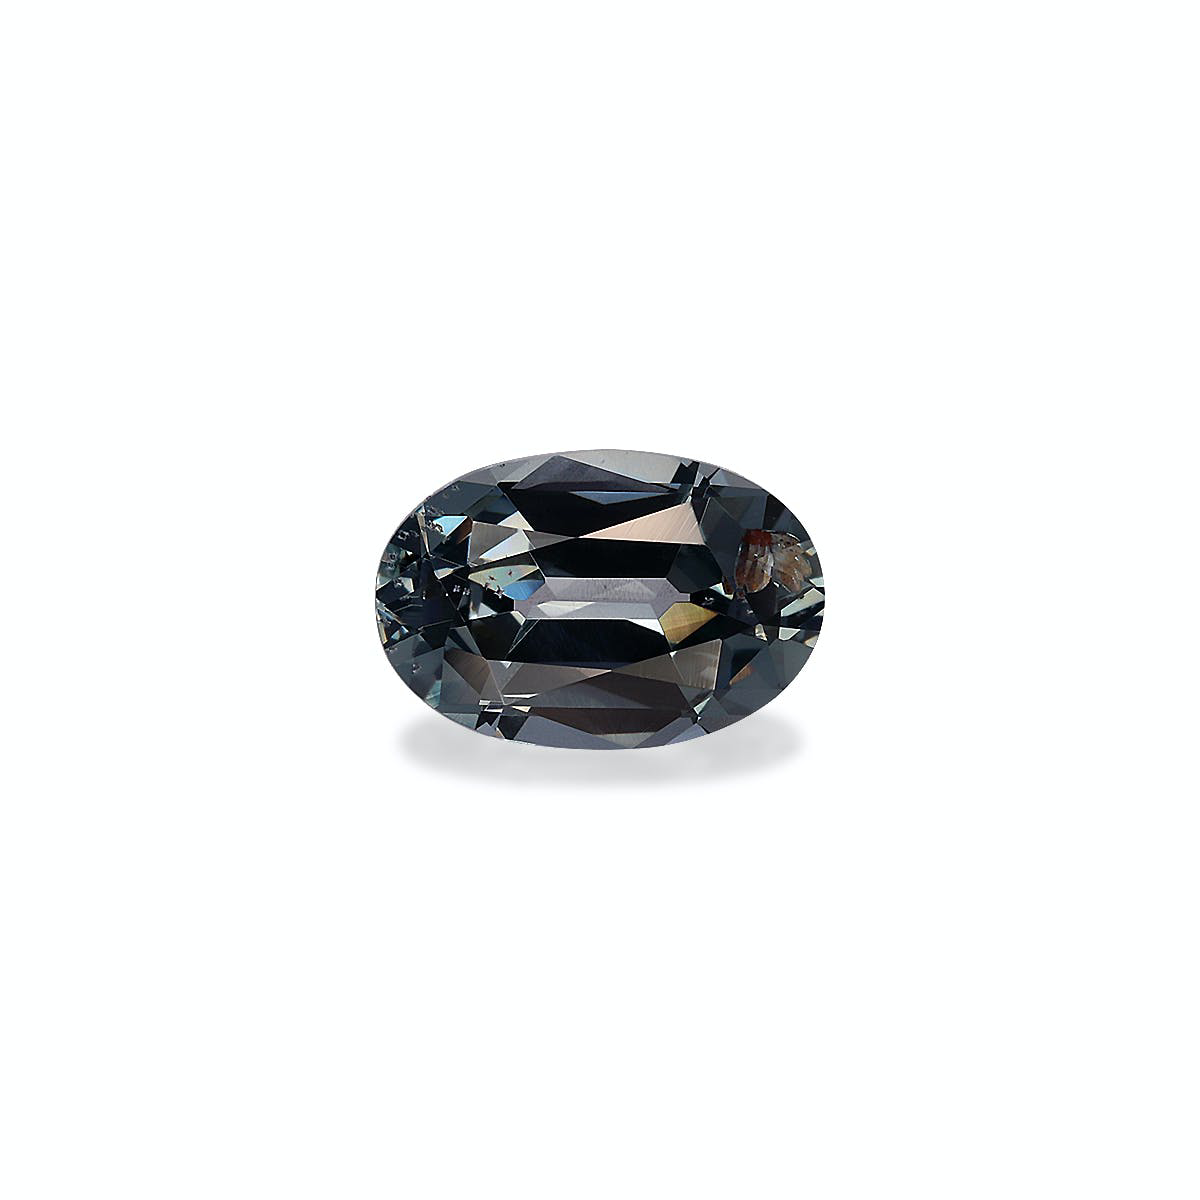 Picture of Metallic Grey Spinel 1.04ct - 7x5mm (SP0407)